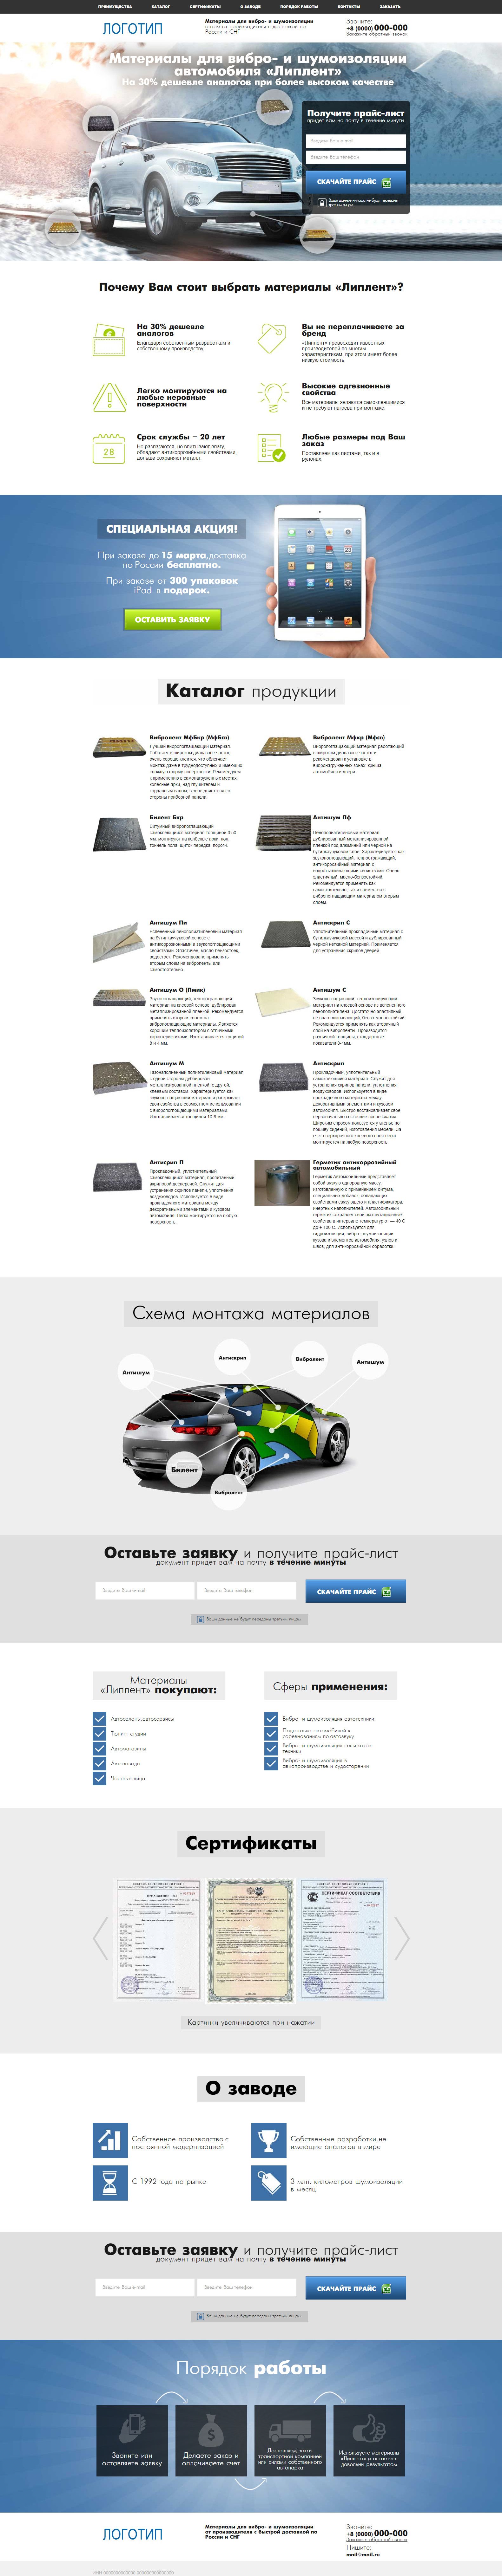 Landing page - Materials for vibration and noise insulation of cars